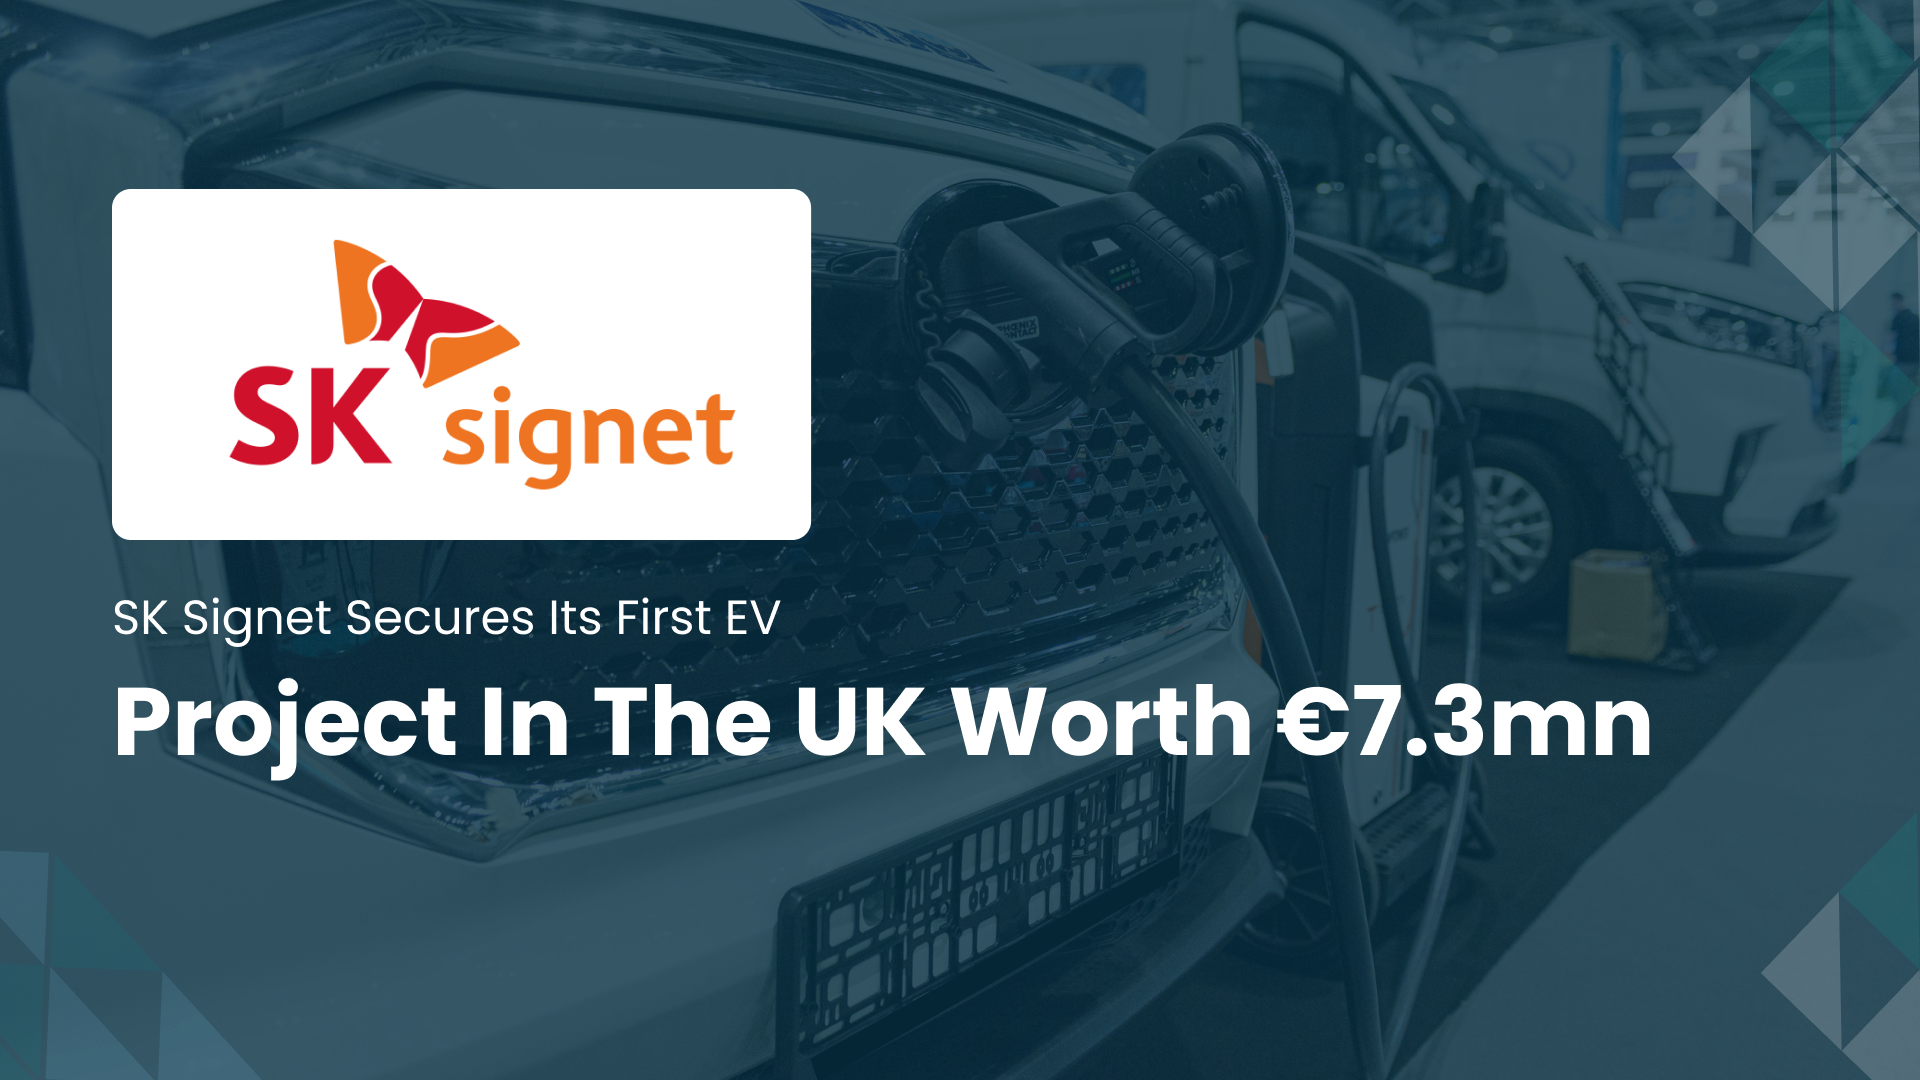 SK Signet Secures Its First EV Project In The UK Worth €7.3mn